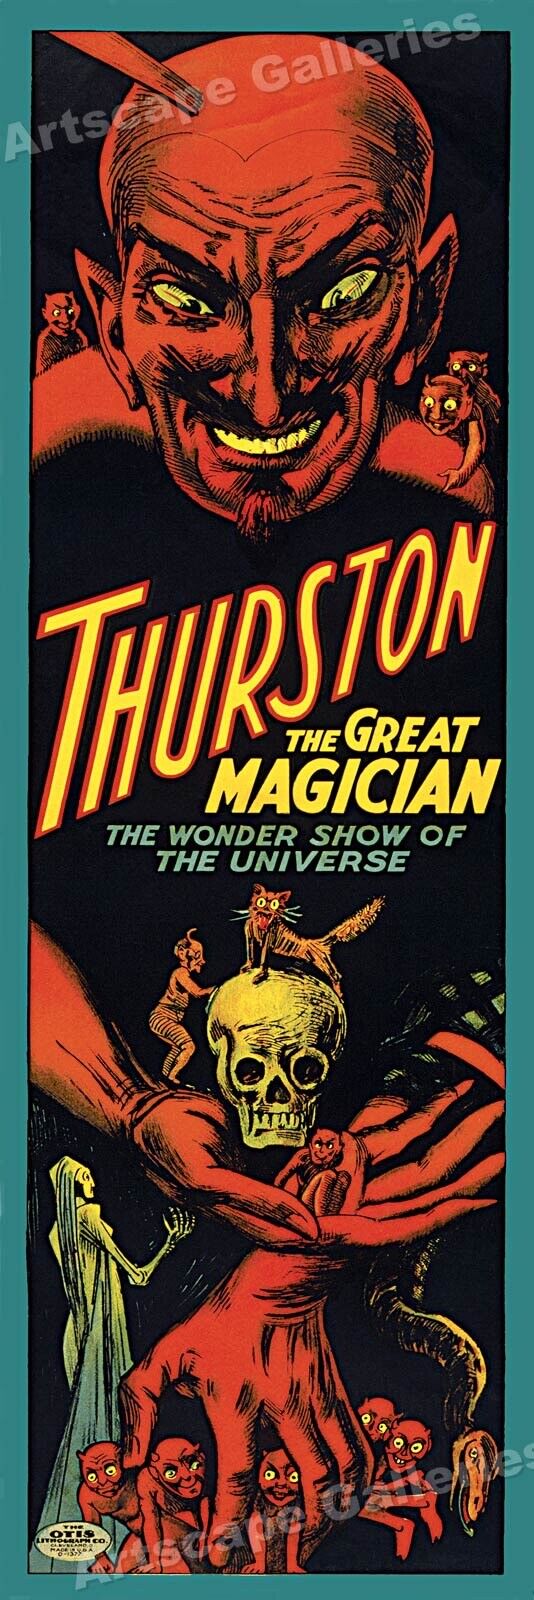 1914 Thurston The Great Magician - Vintage Style Magic Poster - 12x36